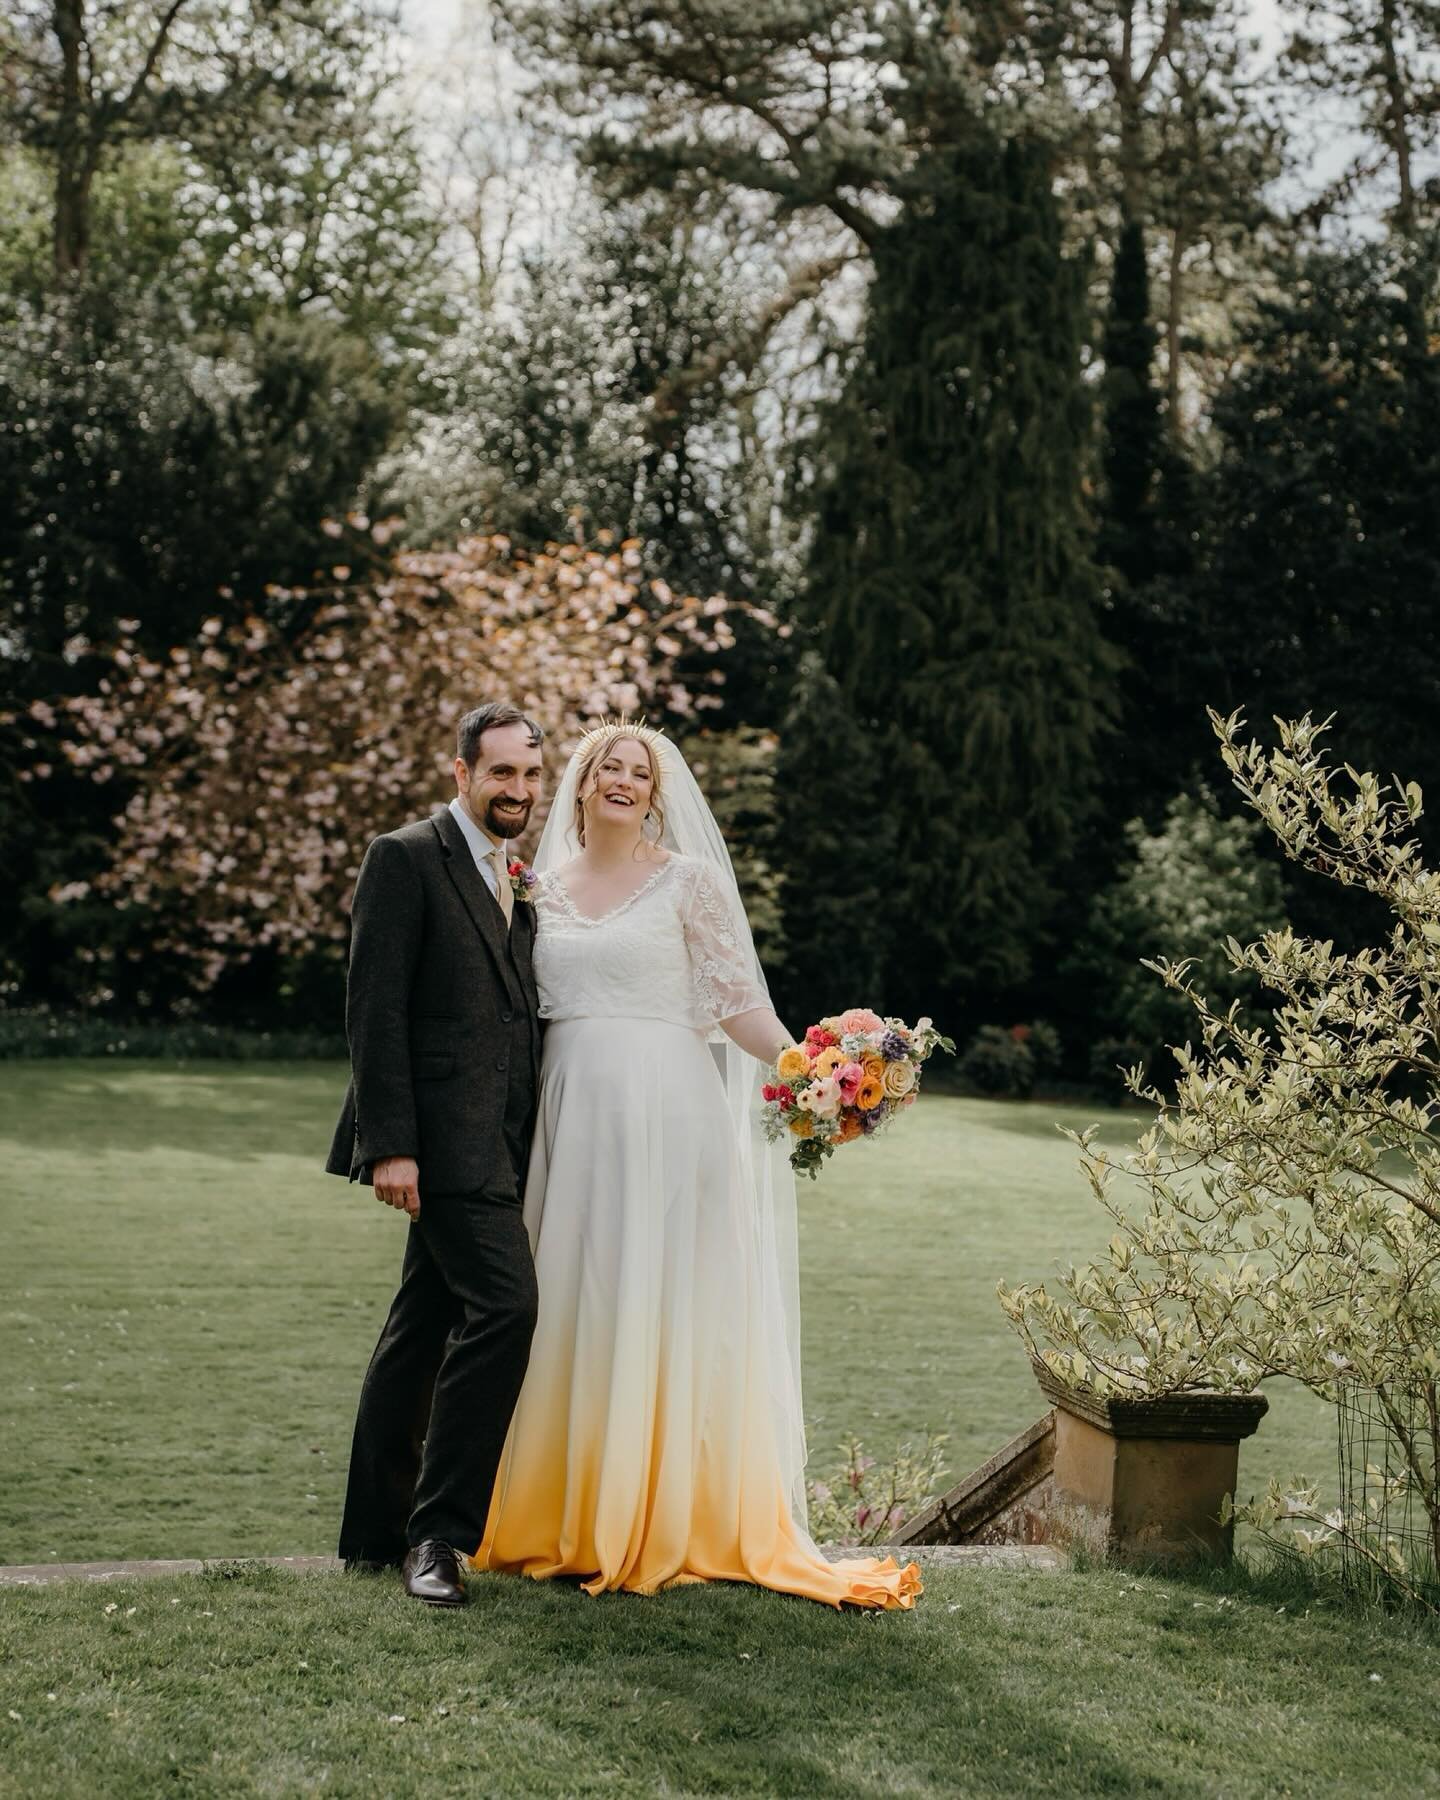 The celebration continued for Becky &amp; Adrian at @highfield_hotel where @tyingtheknotceremonies conducted the most heartwarming ceremony, telling stories of how Becky &amp; Adrian came to be, inviting guests to read poems and tales dedicated to th